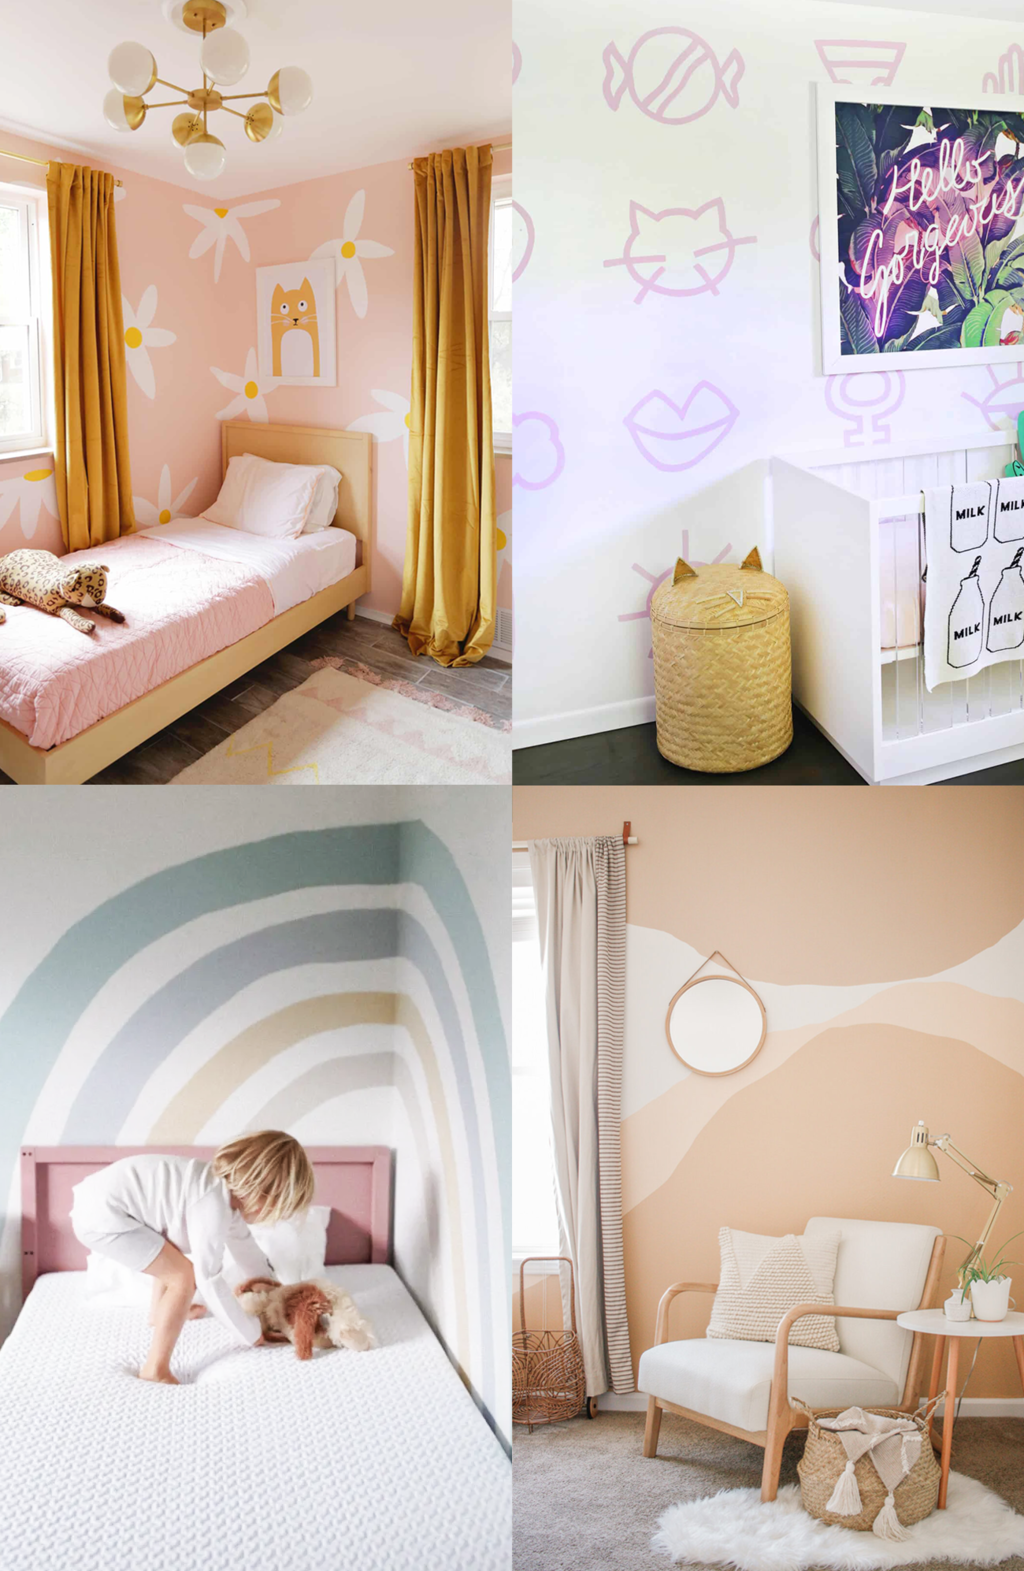 Girls Room Paint Ideas for easy wall painting ideas by Sugar & Cloth